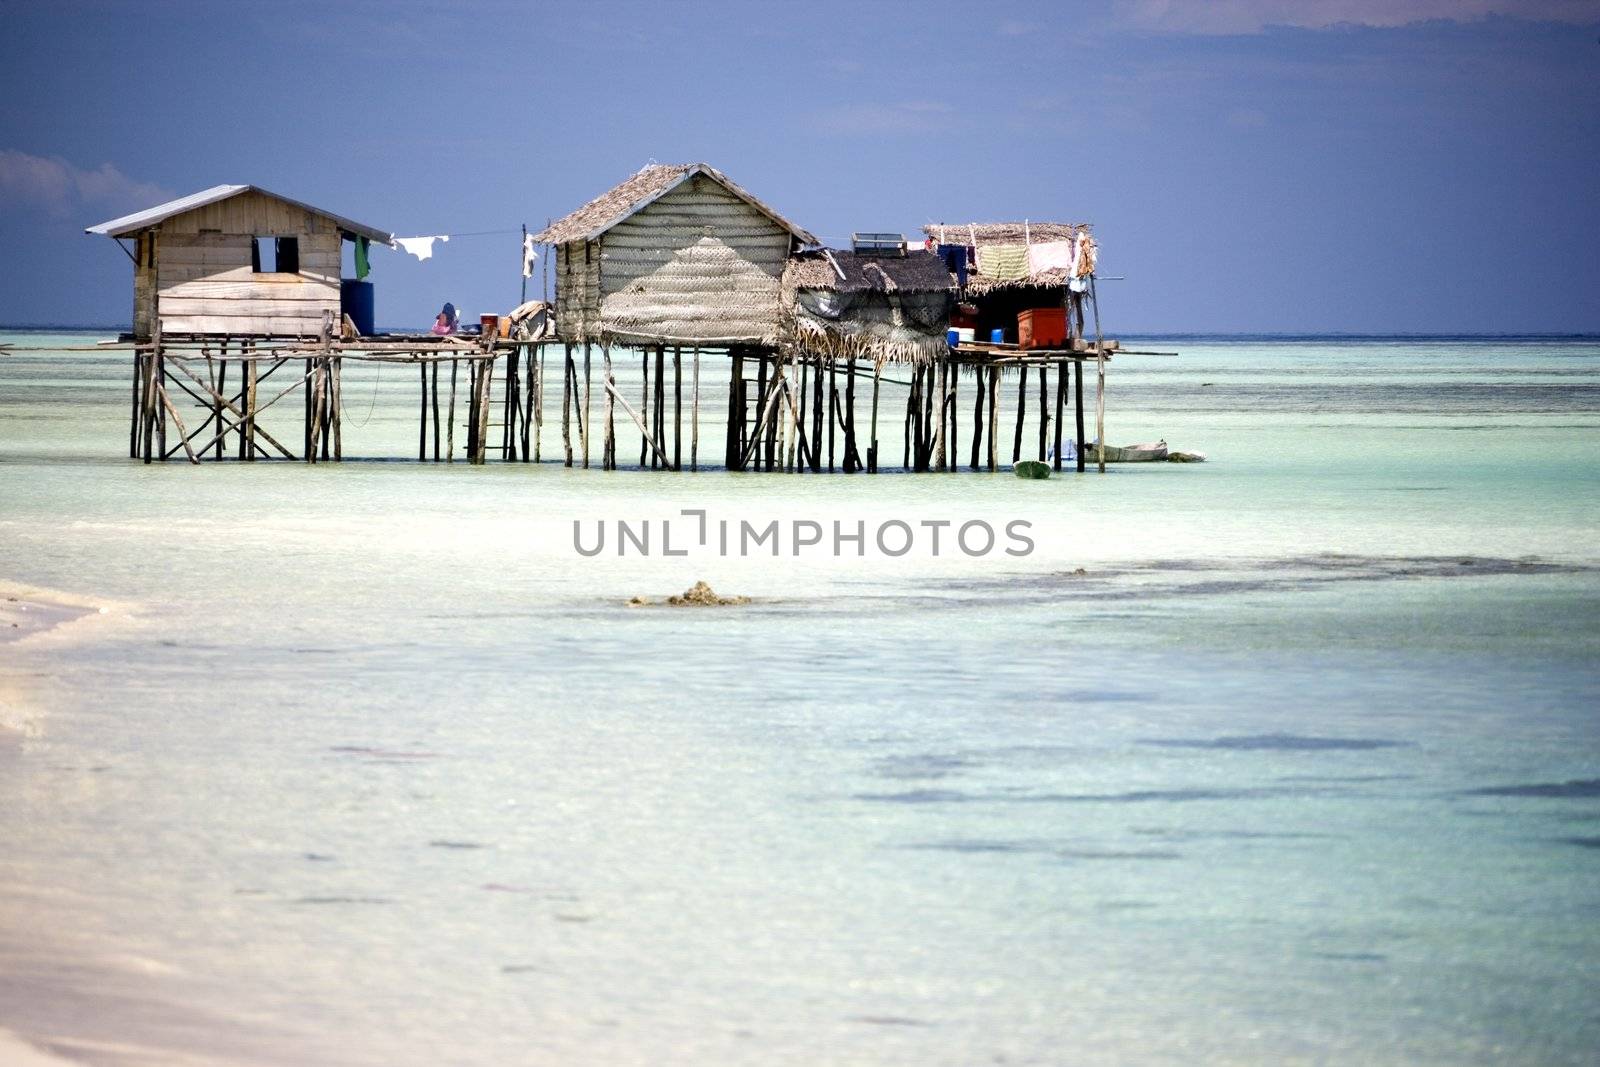 Image of huts on stilts with clear water in the foreground and blue skies in the background.